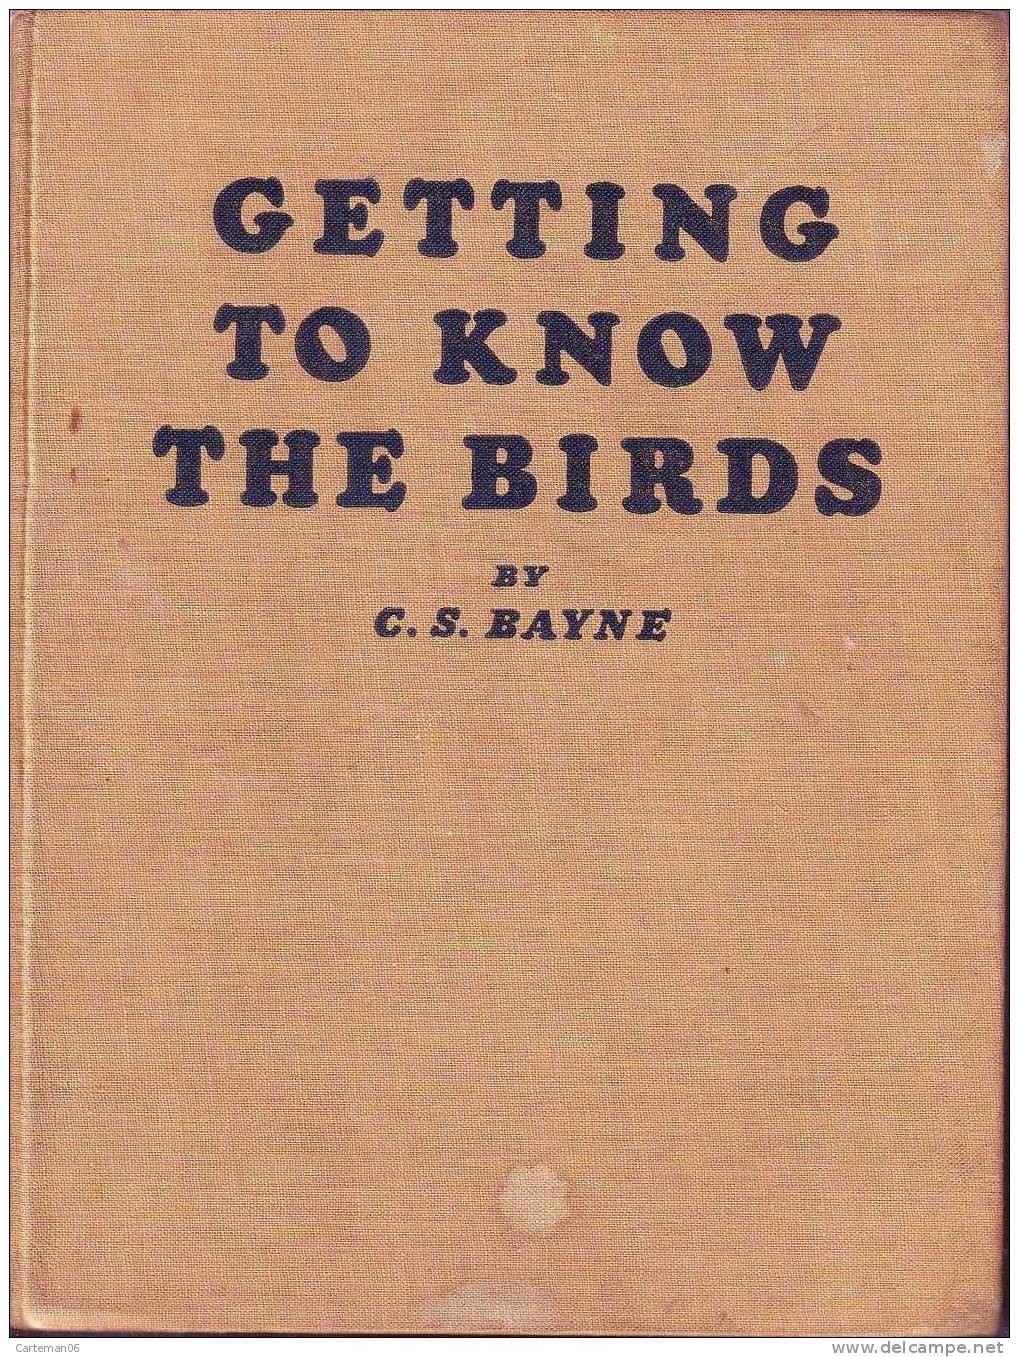 Livre - Getting To Know The Birds By C.S Bayne Illustrated By Ralston Gudgeon R.S.W 1944 (oiseaux) - Animali